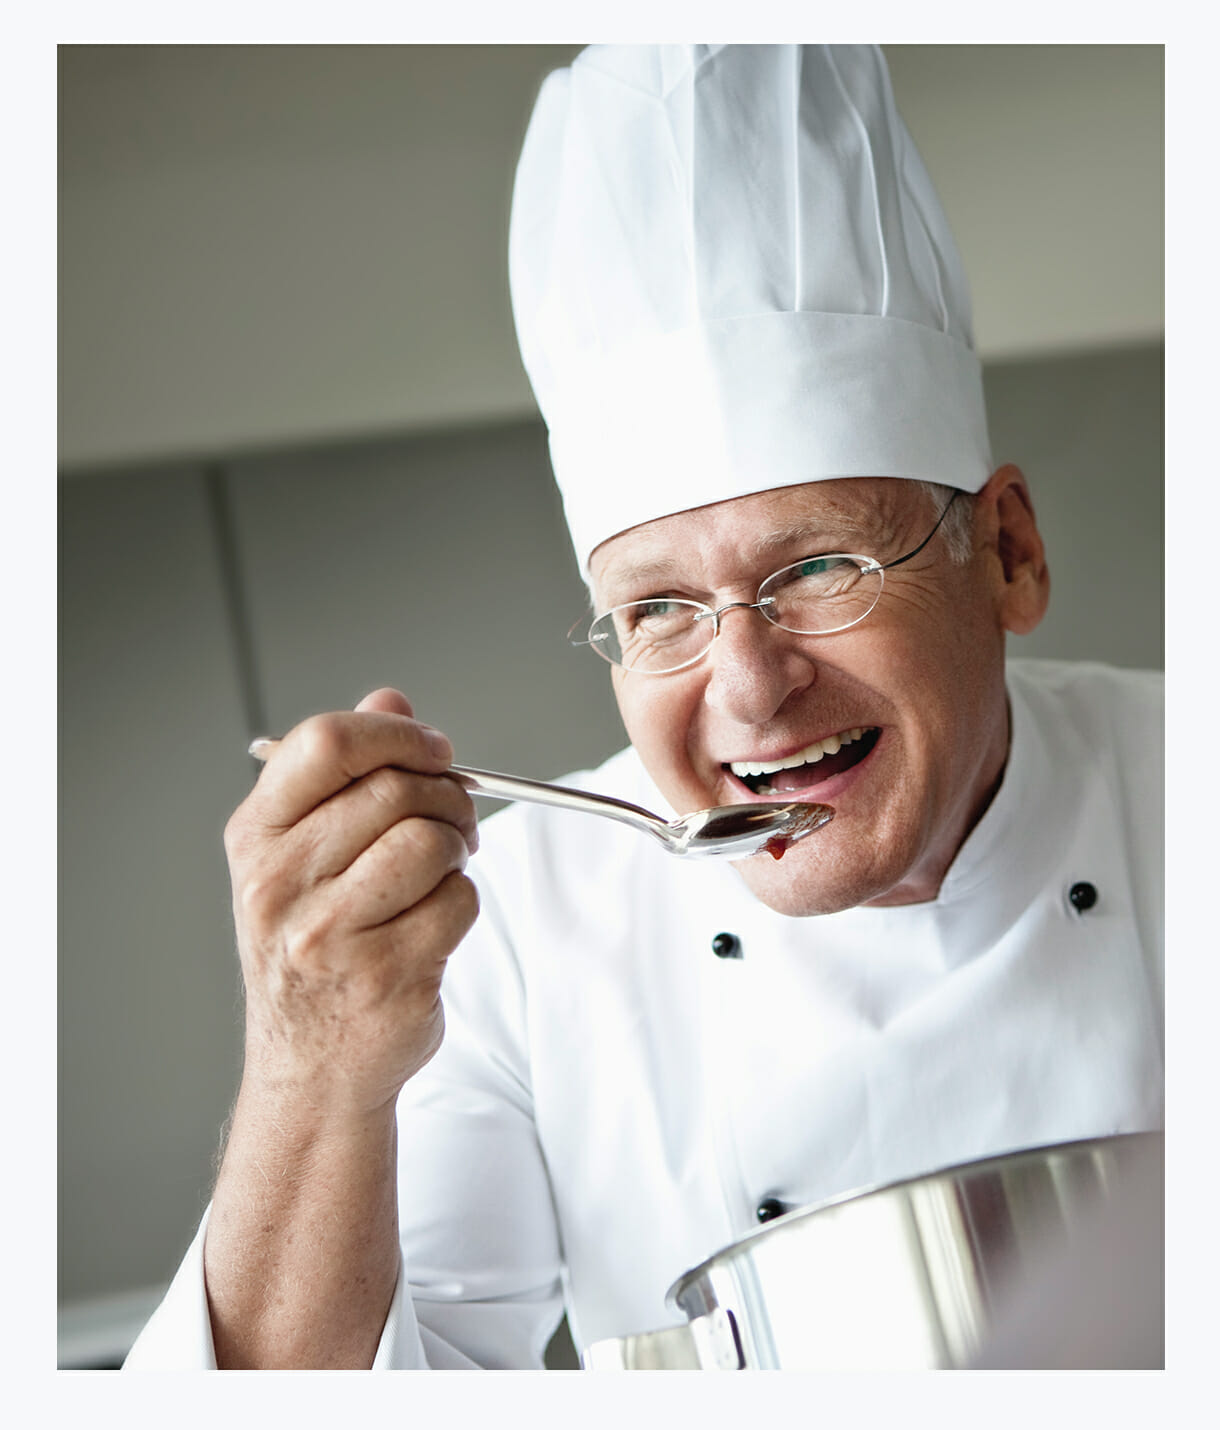 Memory Care Assisted Living private chef with open private kitchen, preparing meals for Memory Care residents, sensory stimulation, aroma therapy